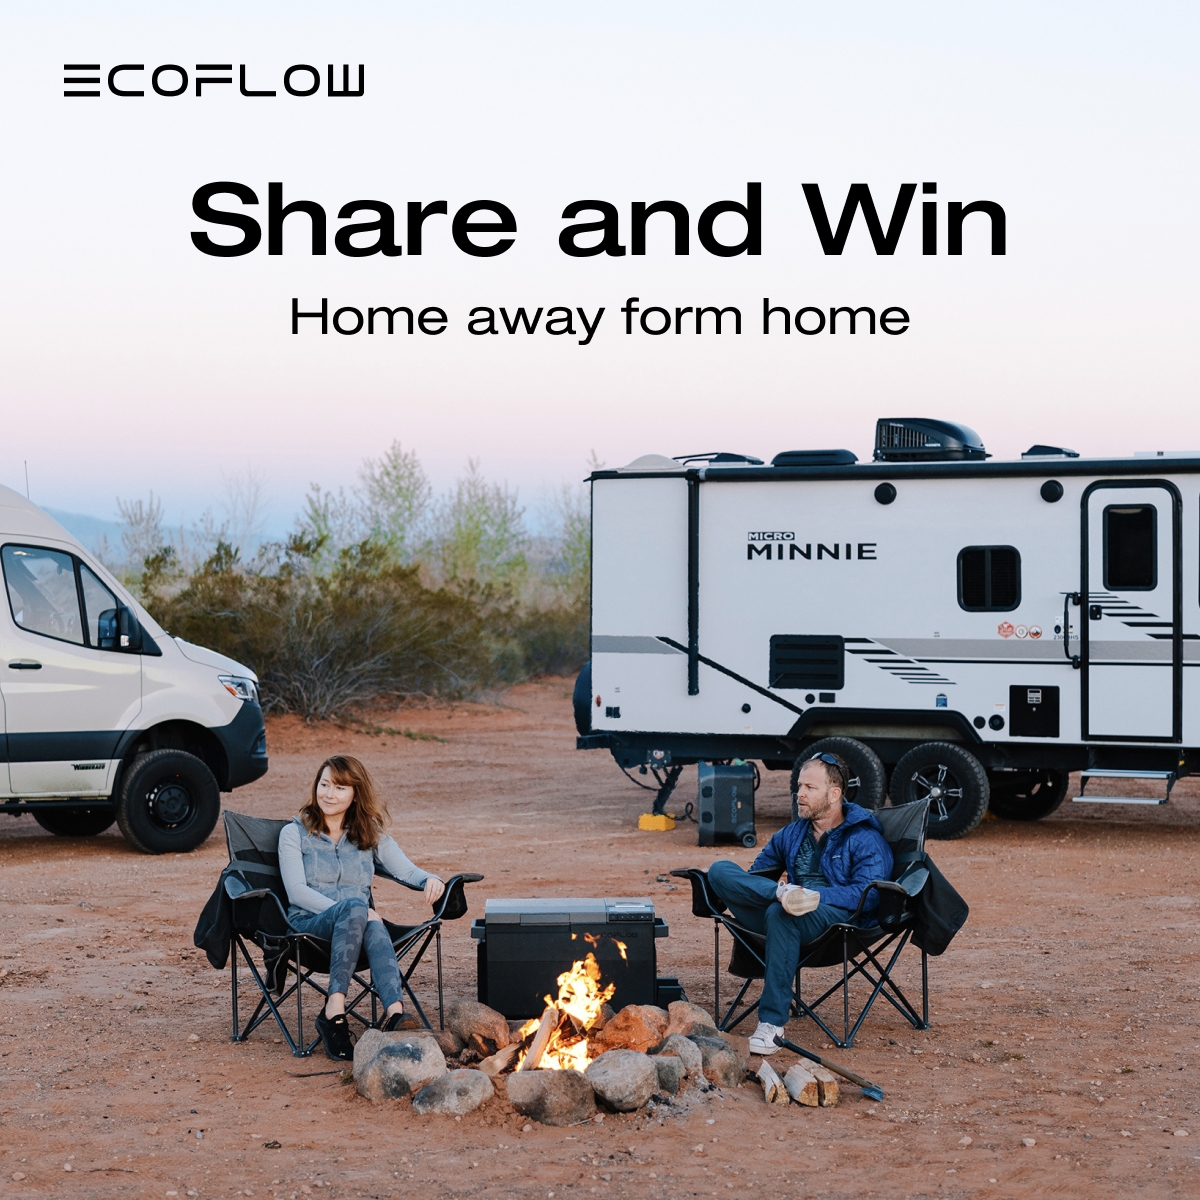 Calling all adventurers - show us how you’ve made the road #FeelsLikeHome 📷 Follow us & share your fave 'home away from home' setups/outdoor snaps and win an #EcoFlowAlternatorCharger! 📅: Entries open until 05.16 🏆: We'll announce one winner on May 10th and another on May 17th